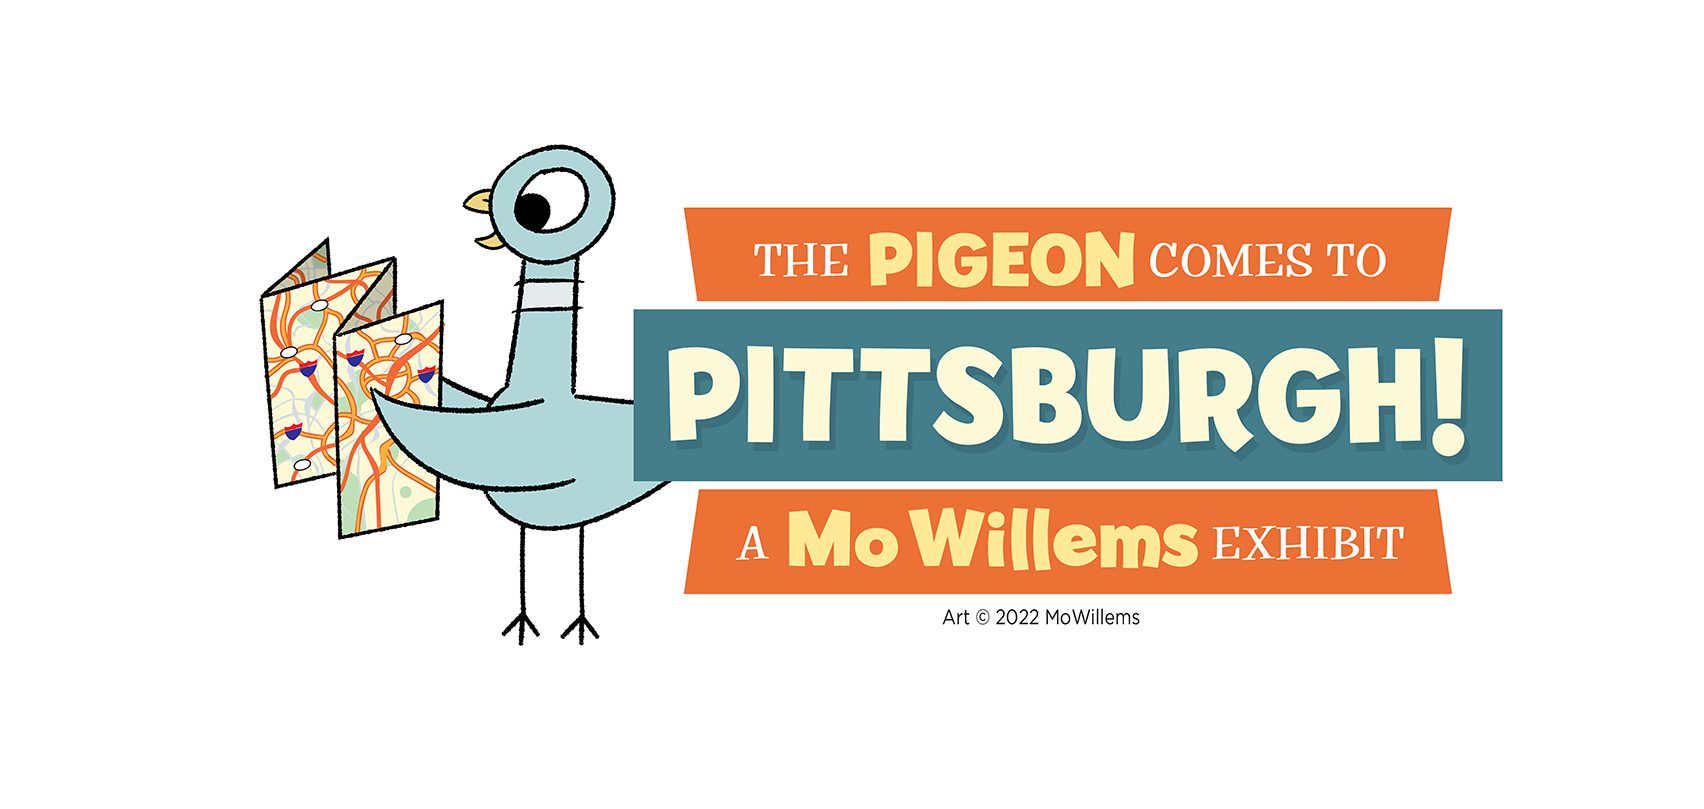 Logo for the exhibit The Pigeon Comes to Pittsburgh! A Mo Willems Exhibit depicting the Pigeon with a map